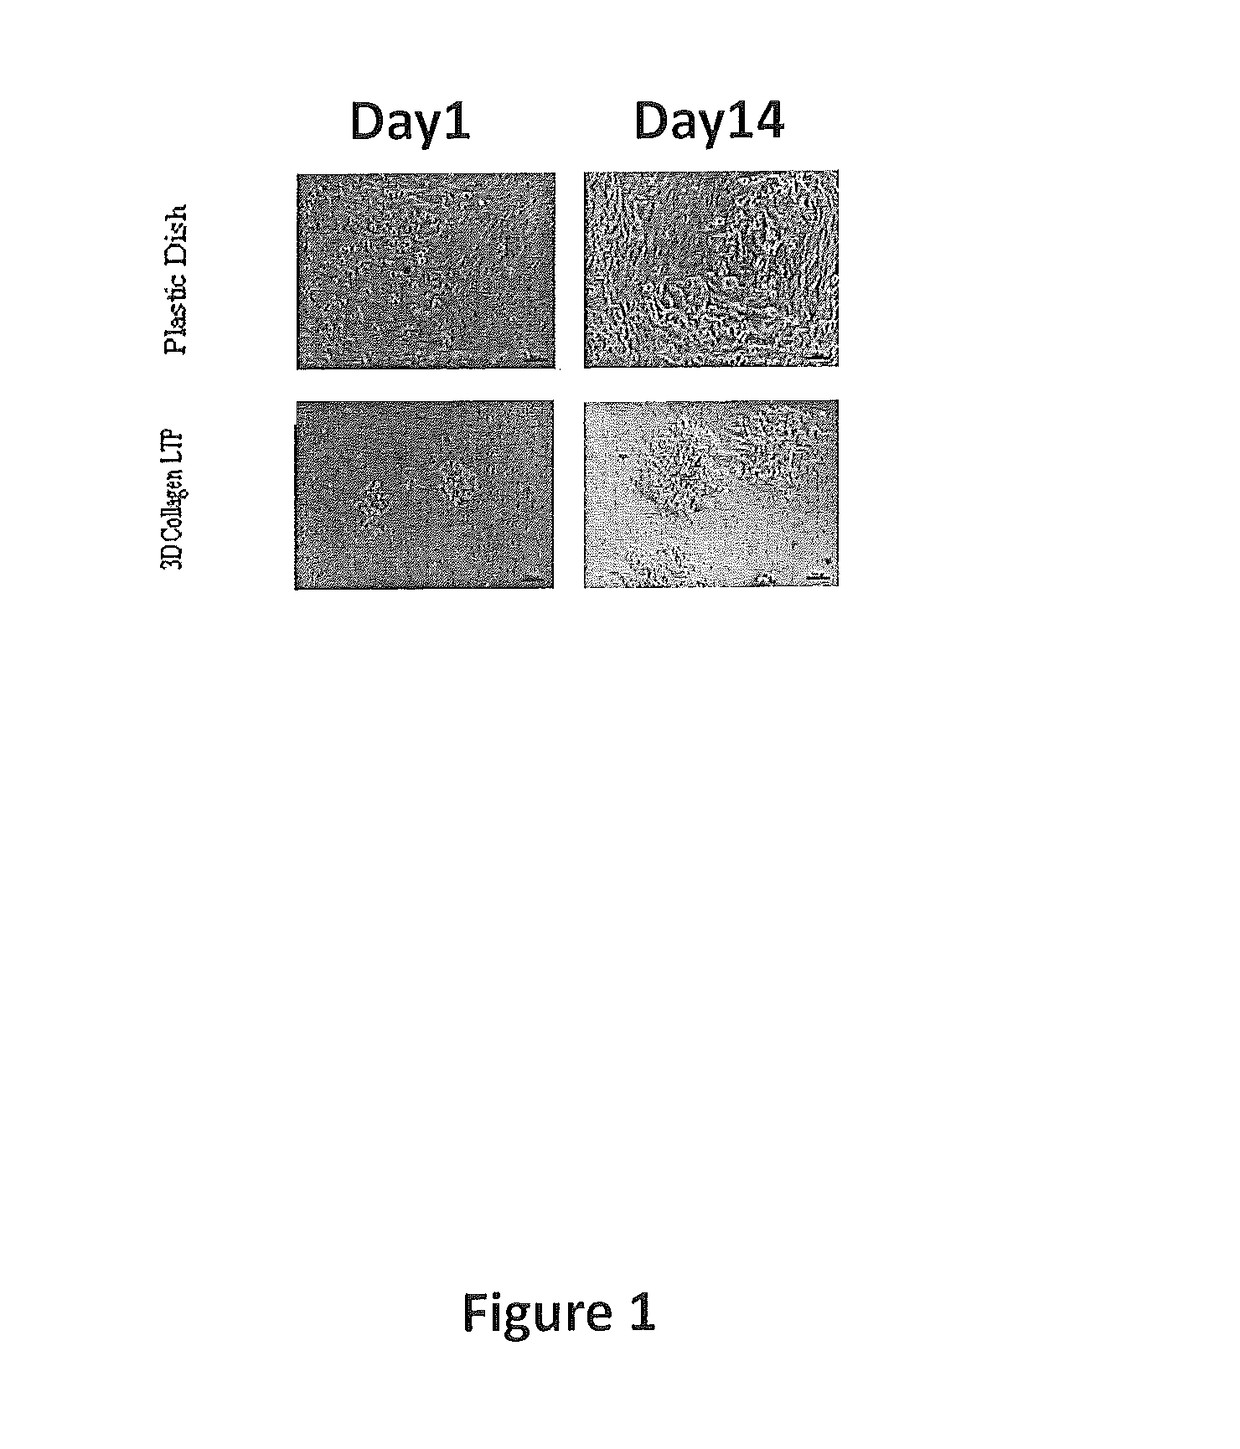 Tissue-specific extracellular matrix with or without tissue protein components for cell culture